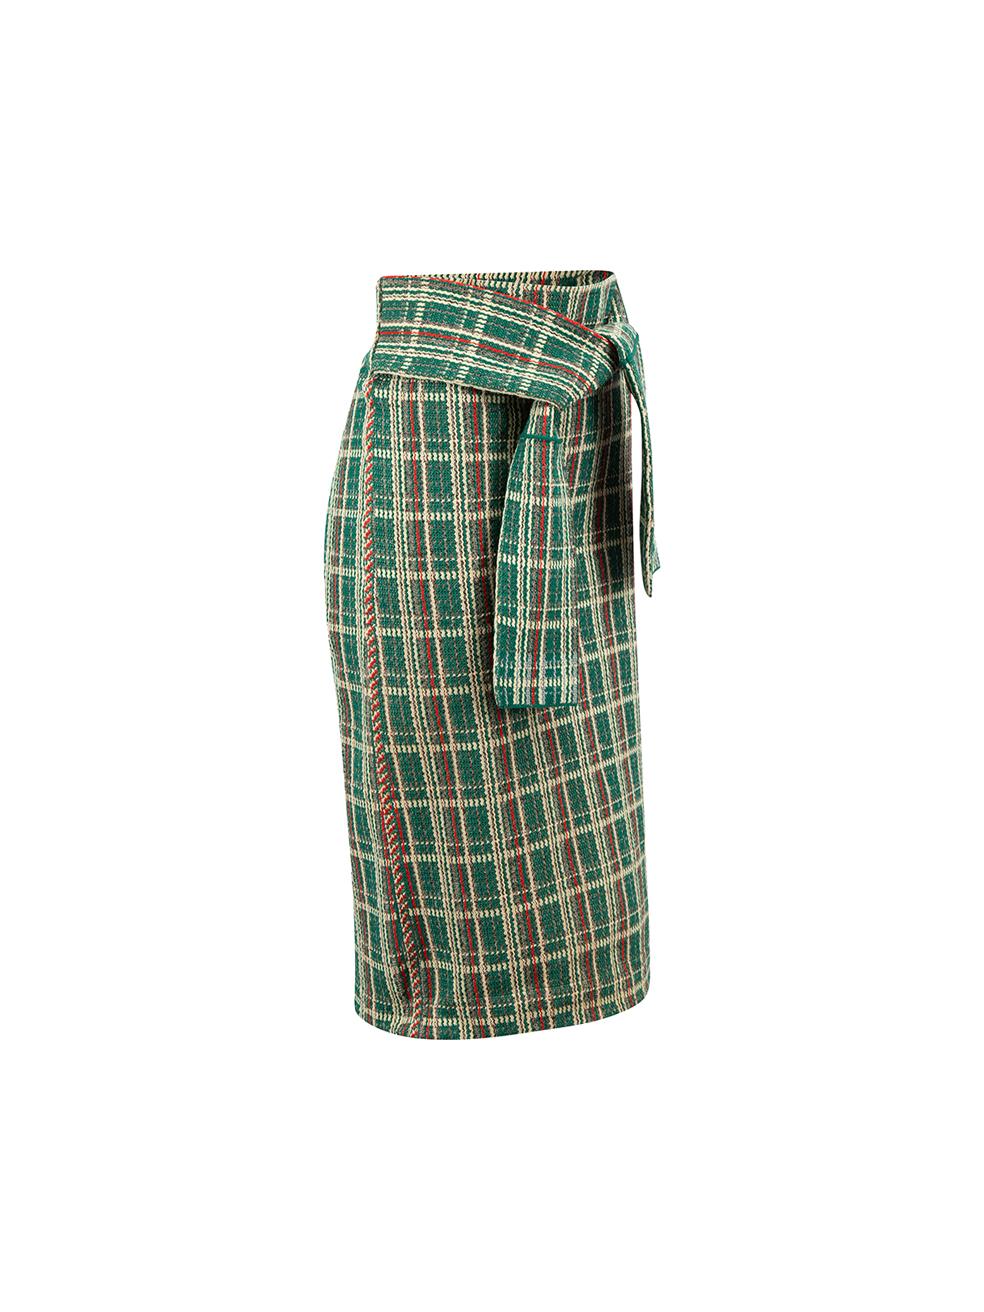 CONDITION is Very good. Minimal wear to skirt is evident. Minimal wear to internal brand label which is partially unstitched on this used Céline designer resale item.

Details
Green
Synthetic
Straight skirt
Midi
Tartan pattern
Waist tie